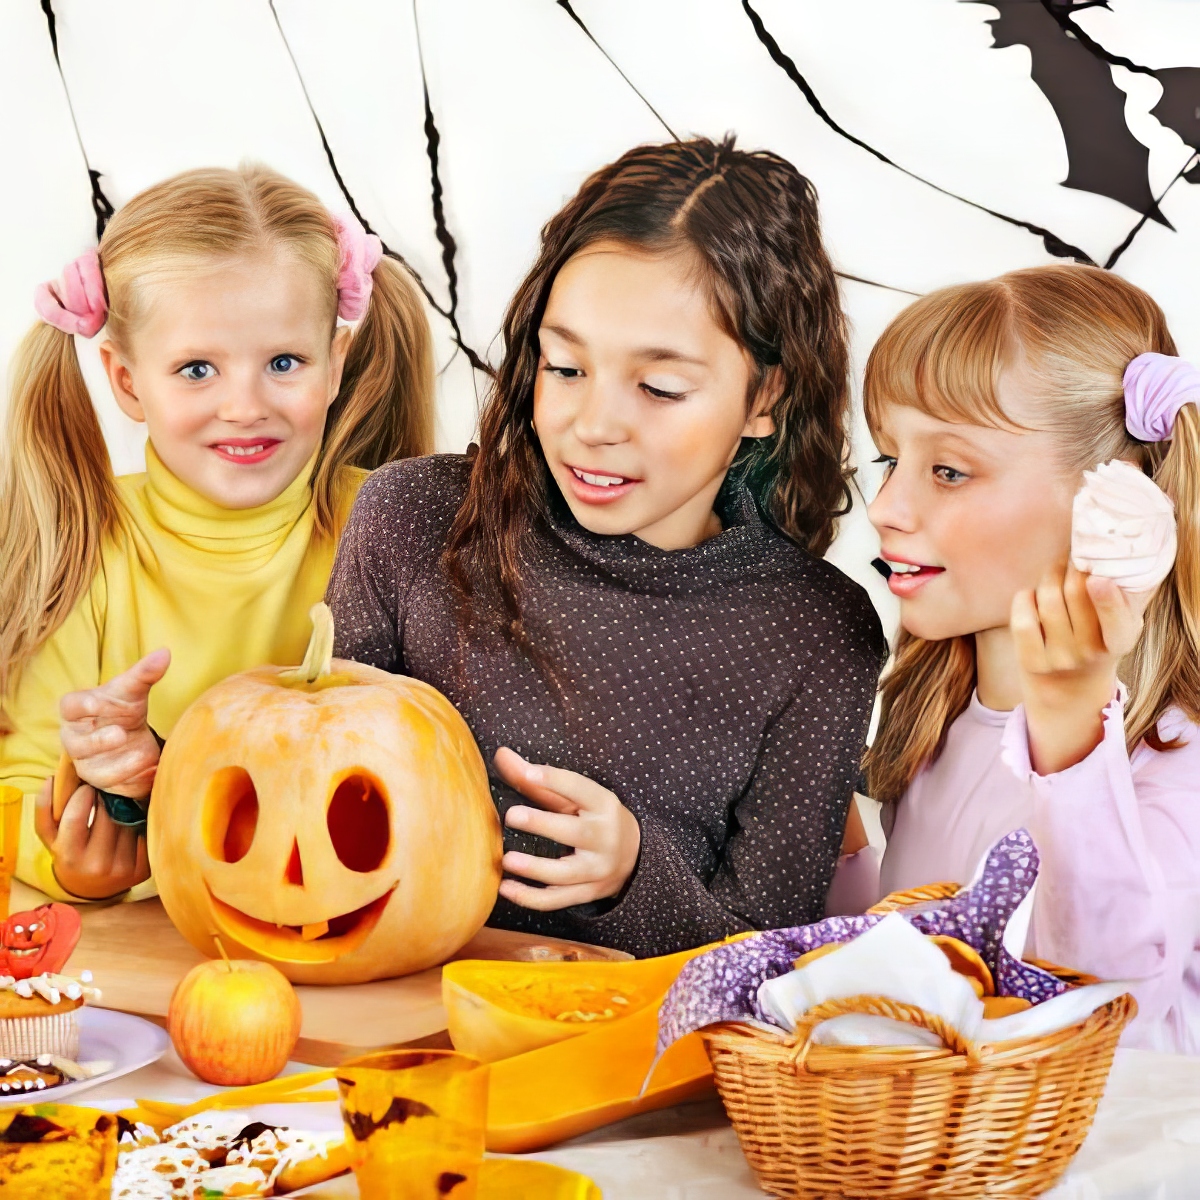 girls carving a pumpkin as halloween activities for 4 year olds